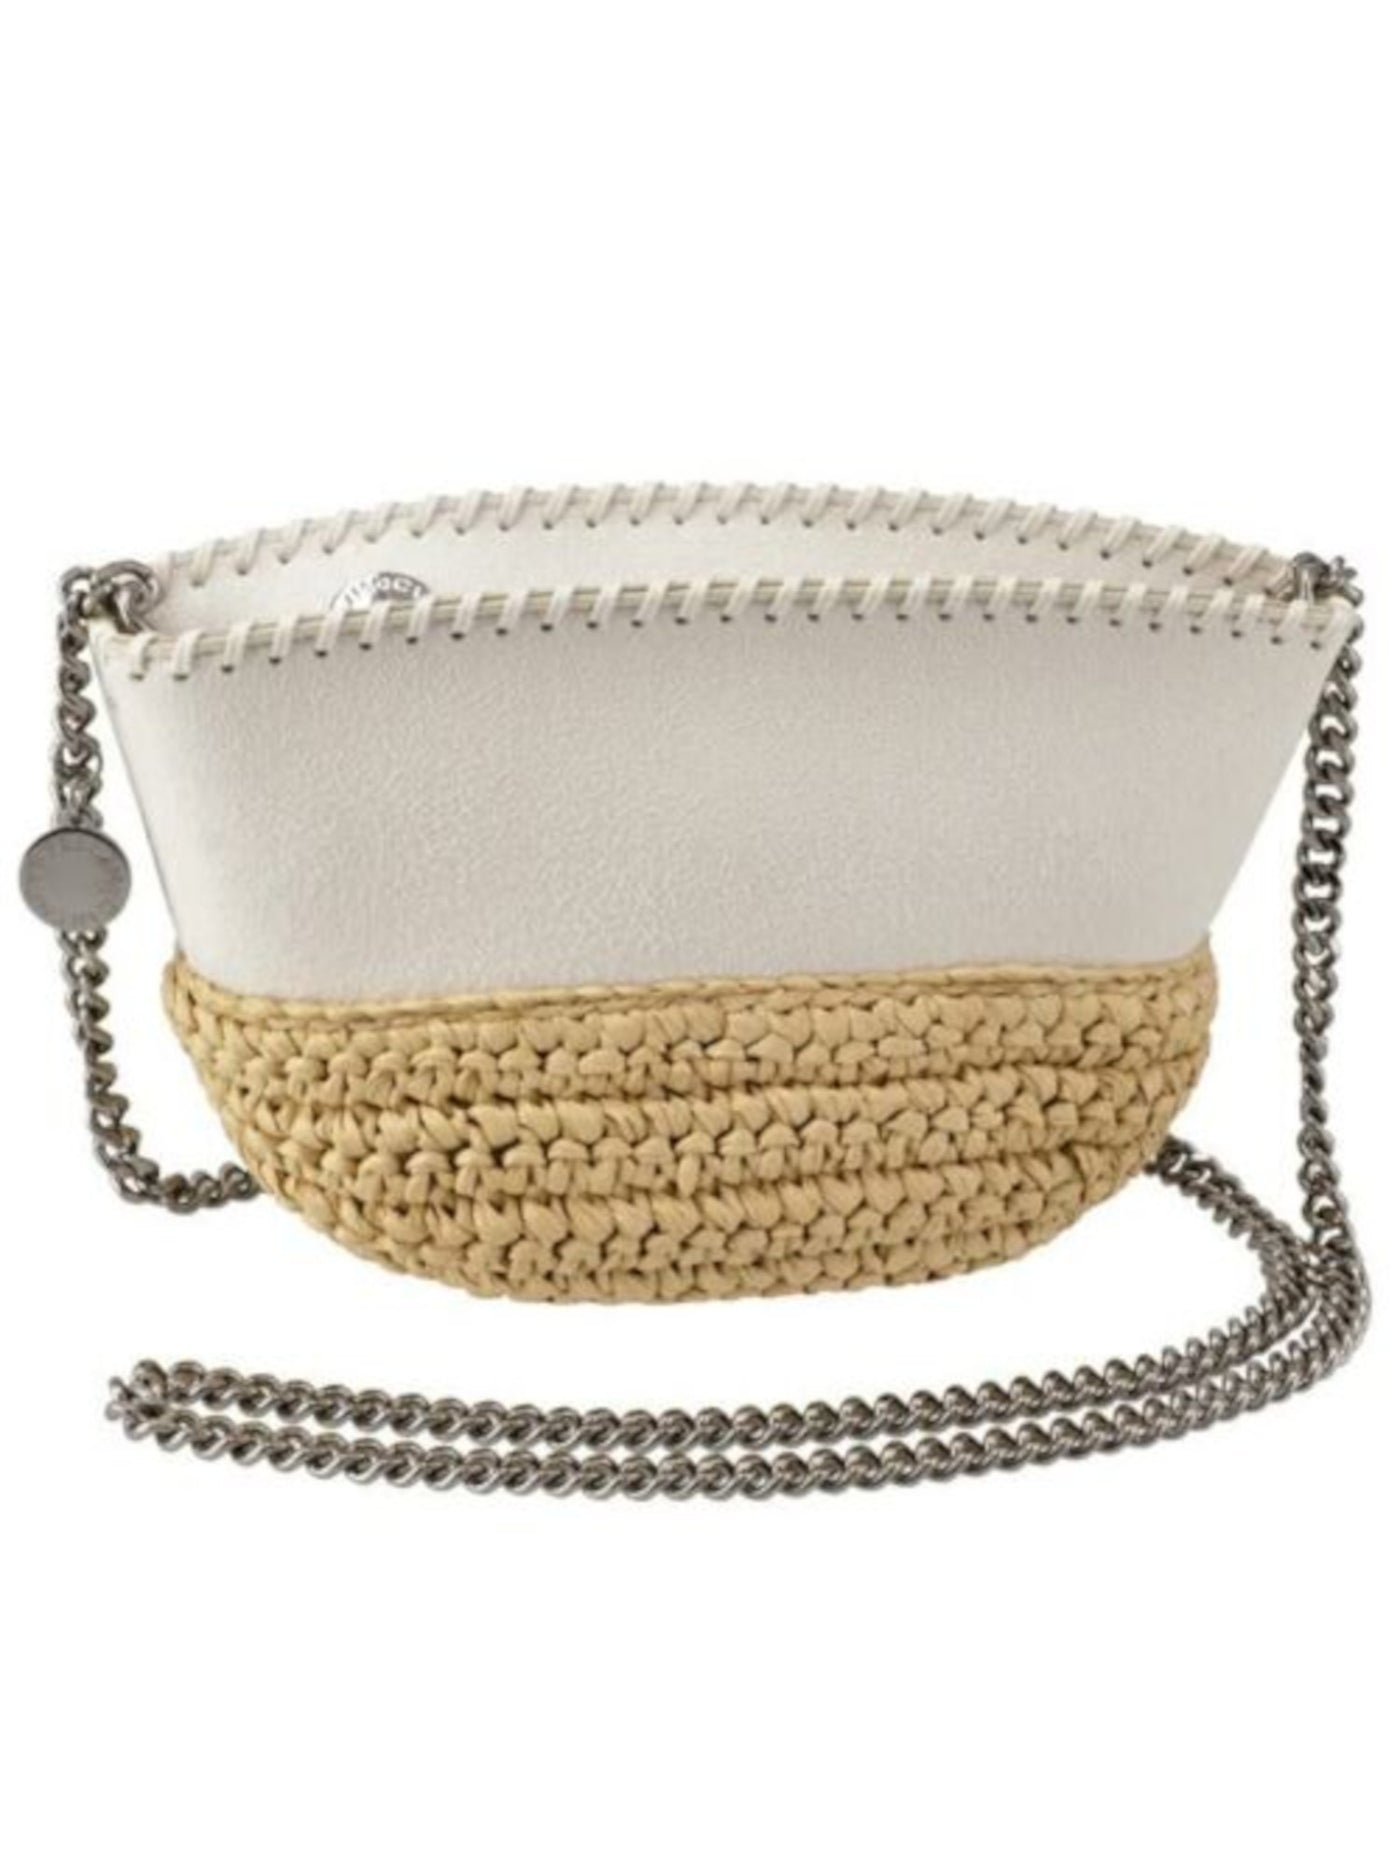 STELLAMCCARTNEY Women's Ivory Faux Leather Whipstitch Detailing Color Block Chain Strap Shoulder Bag